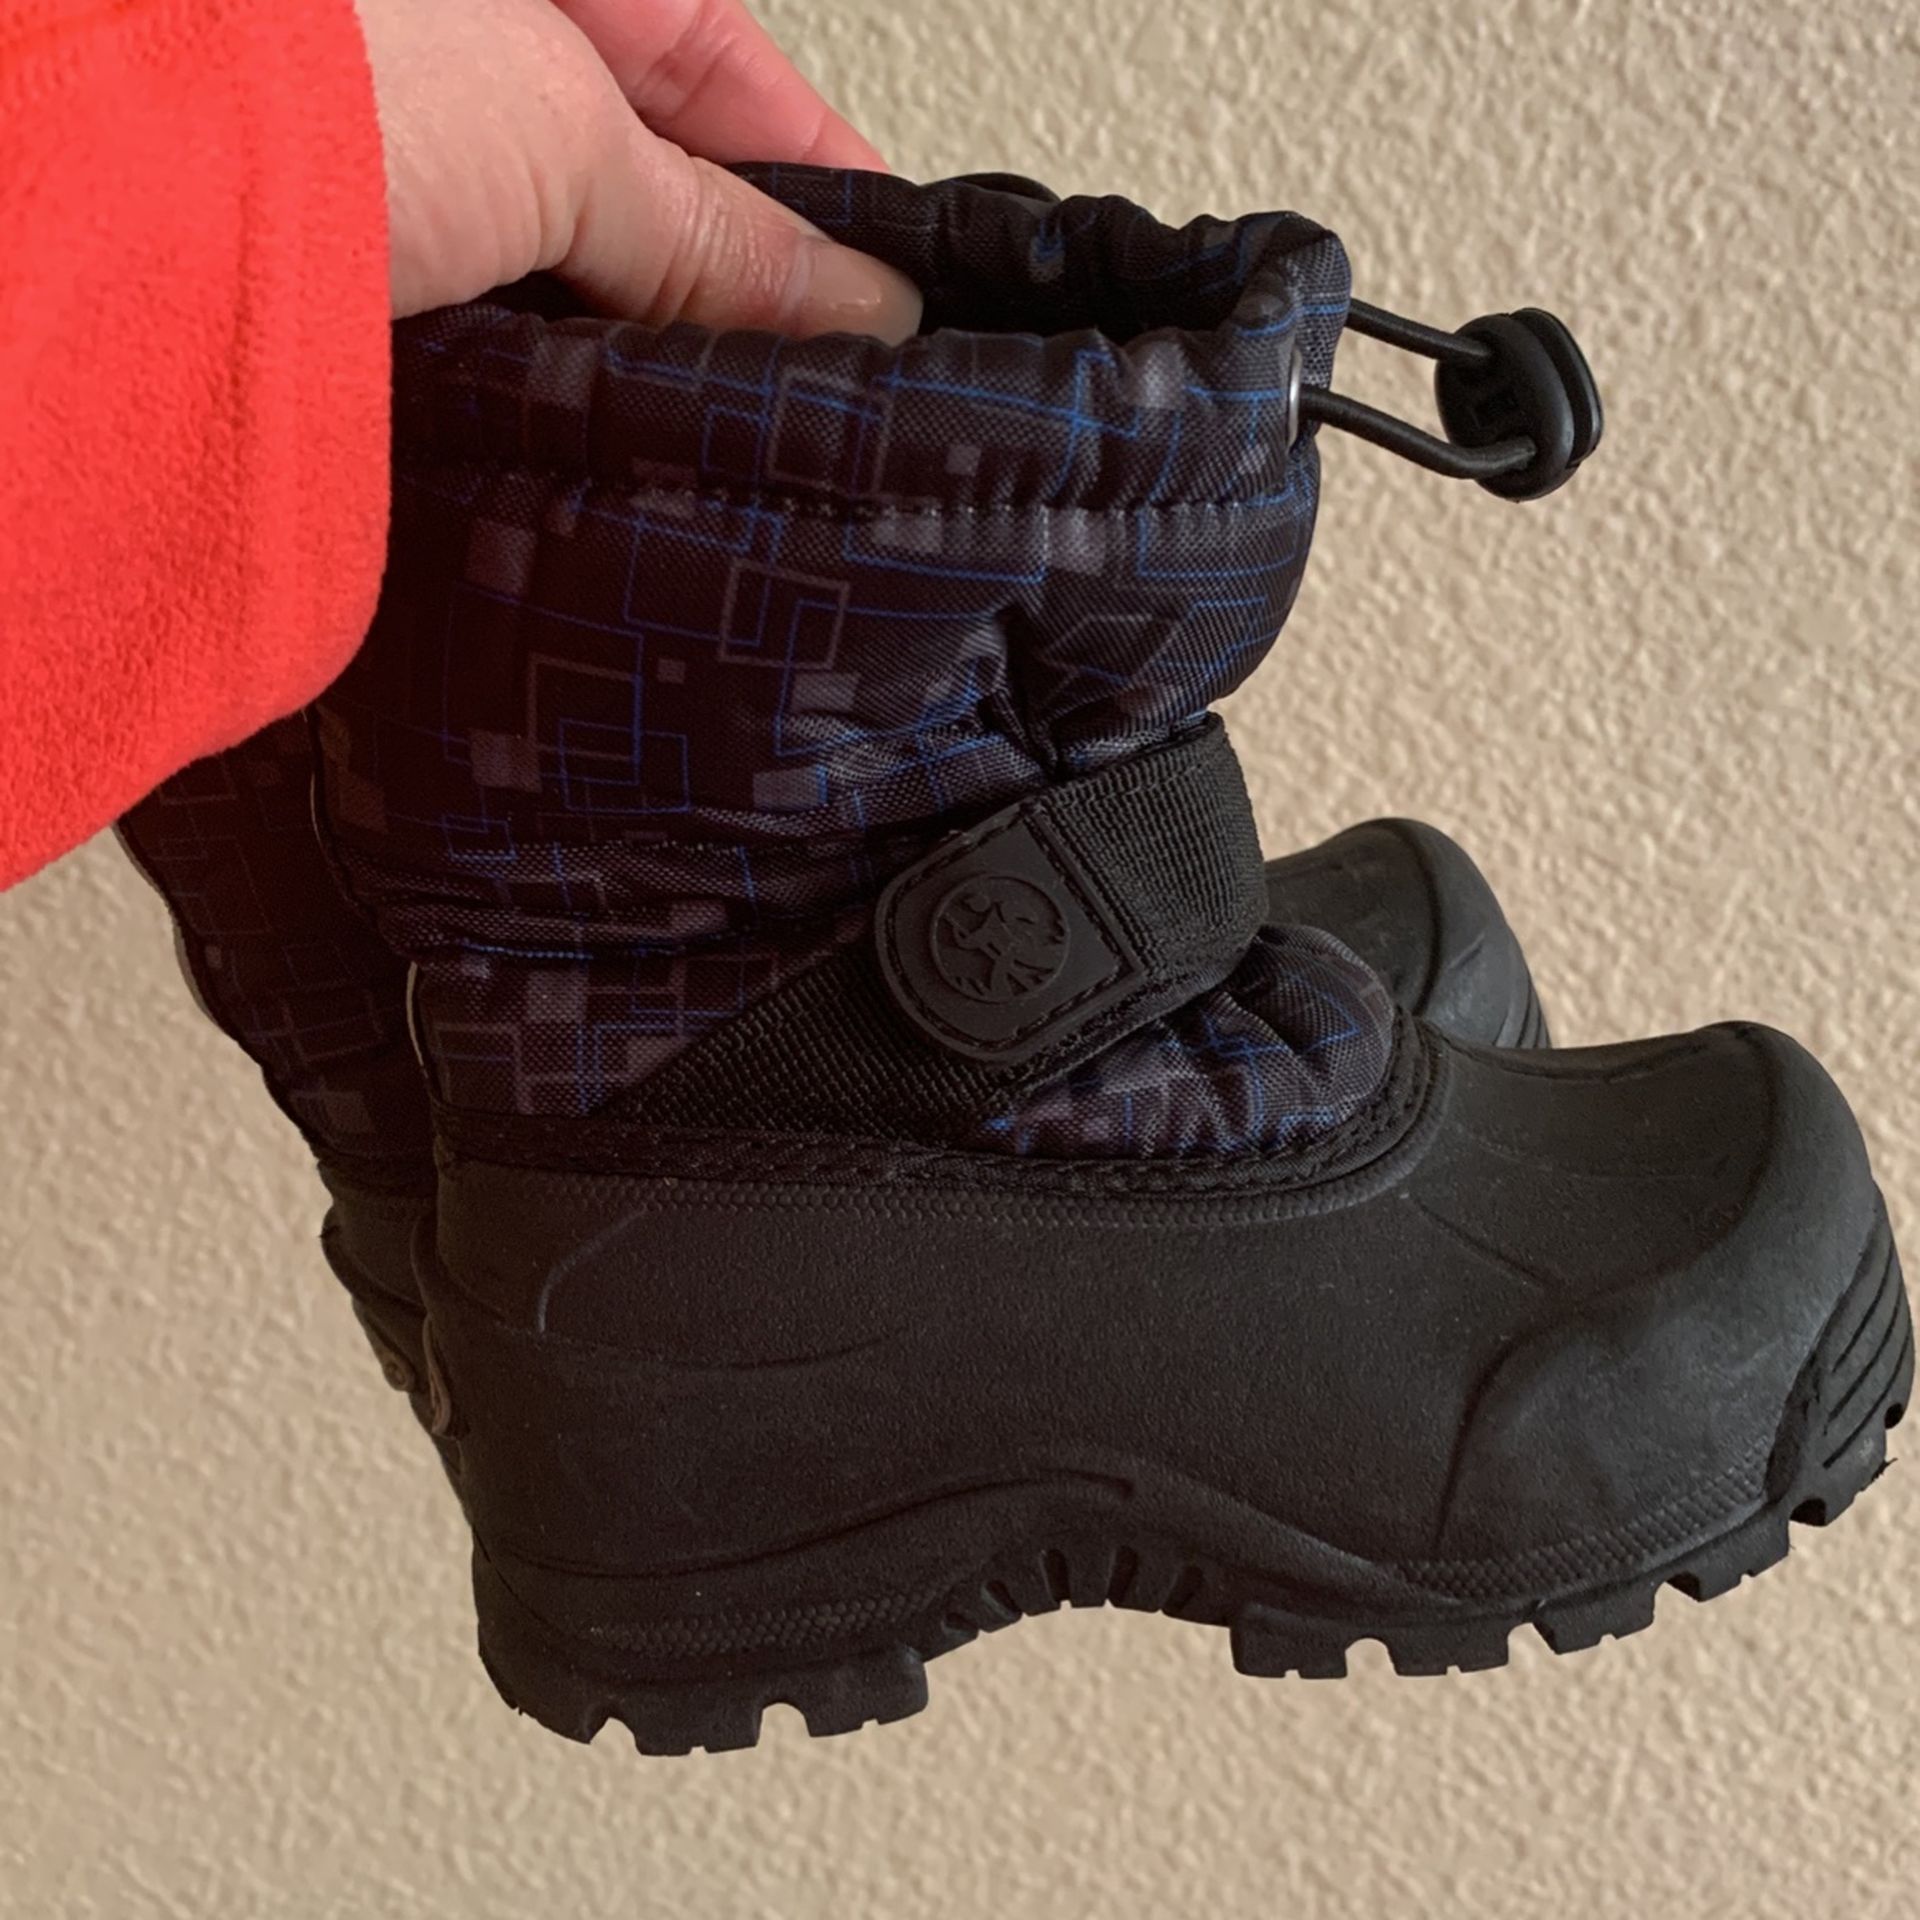 Snow Boots For Kids Size 6